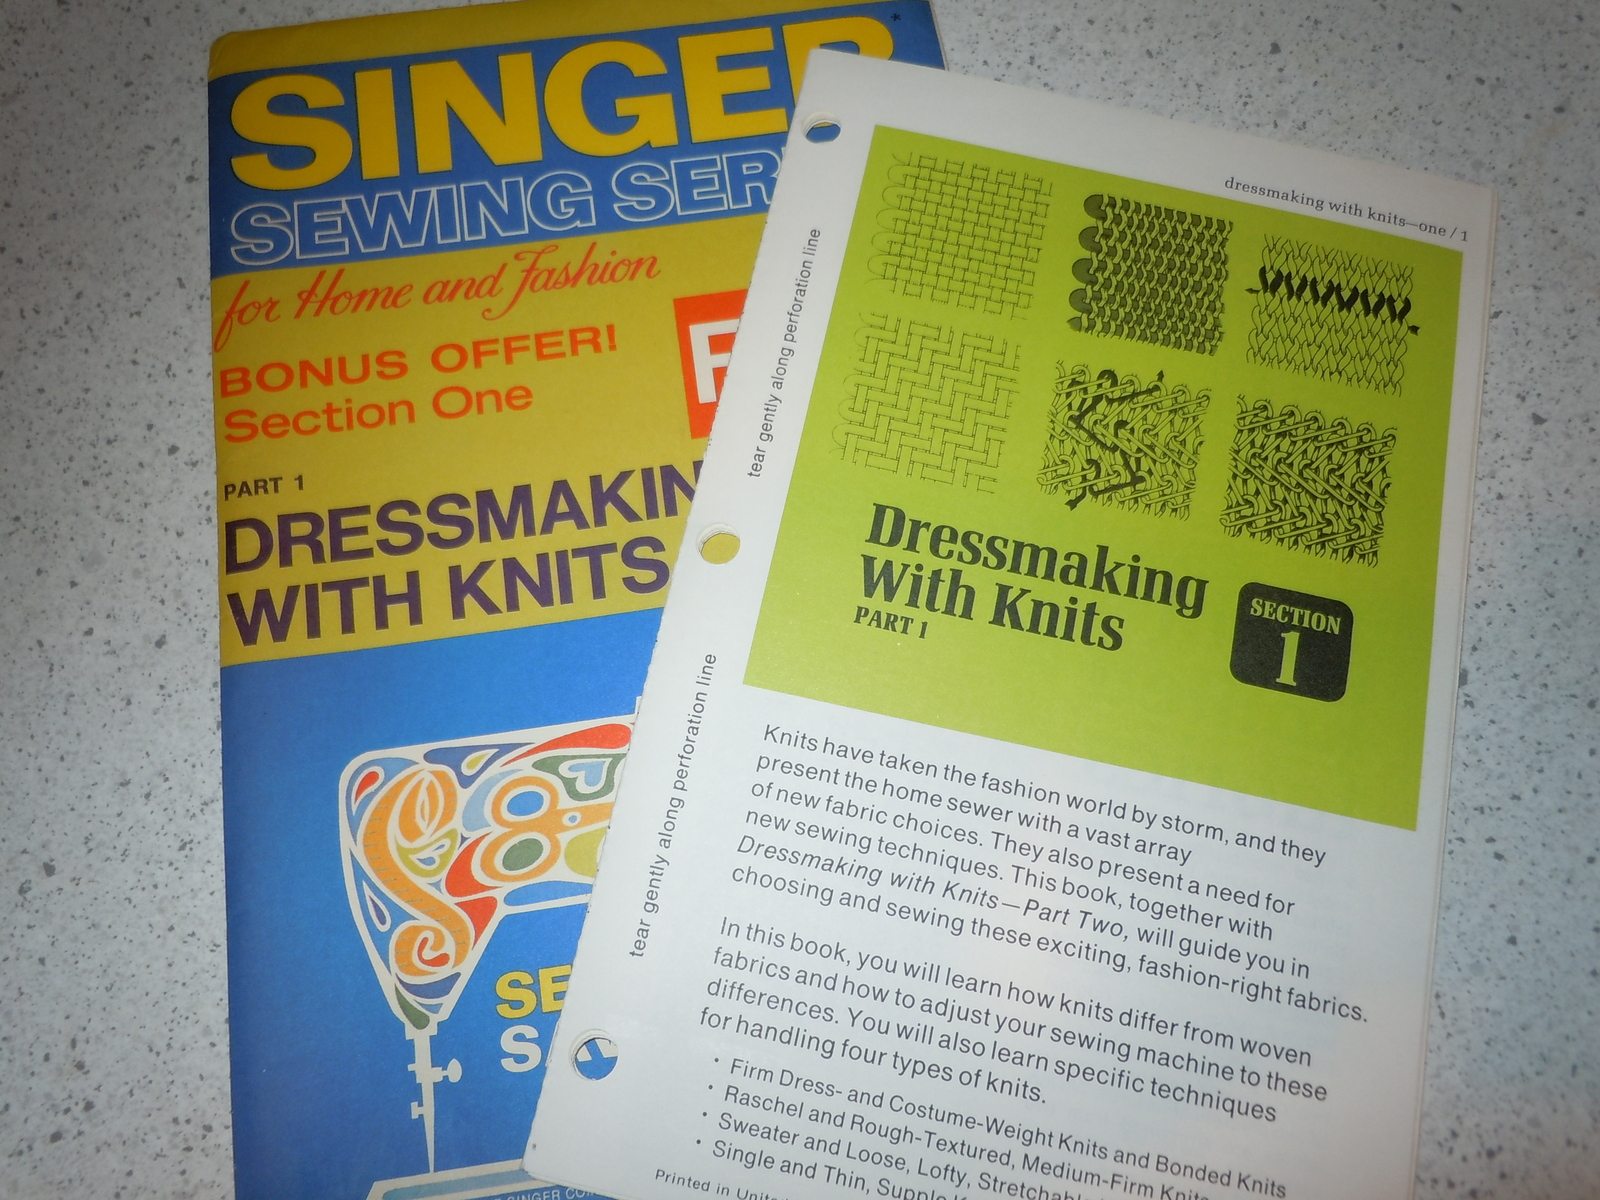 Vintage Singer Sewing Series Dressmaking With Knits Part 1 Dated 1972 - $2.99